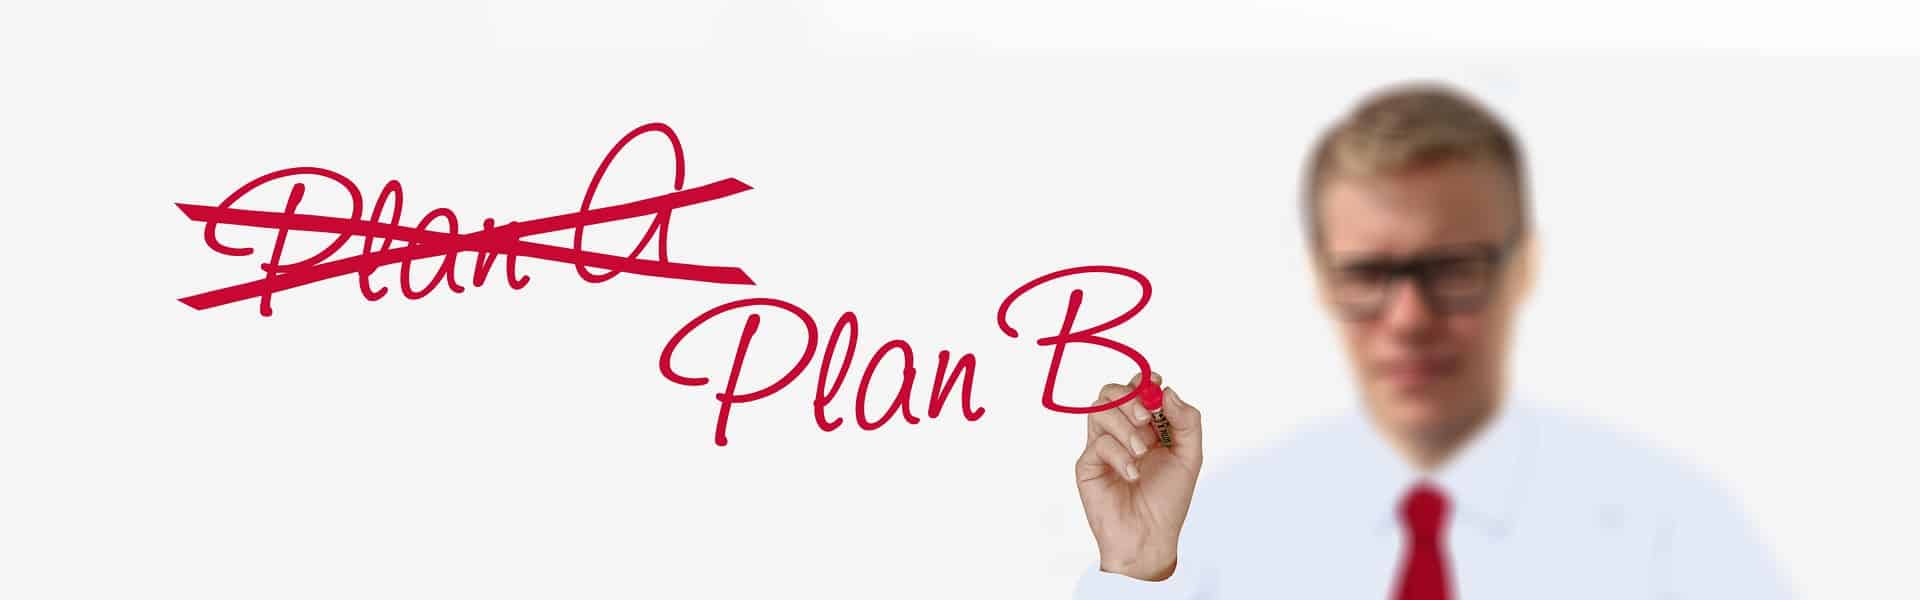 Man crossing out Plan A and choosing Plan B, symbolizing the benefits A/B testing in marketing strategies.